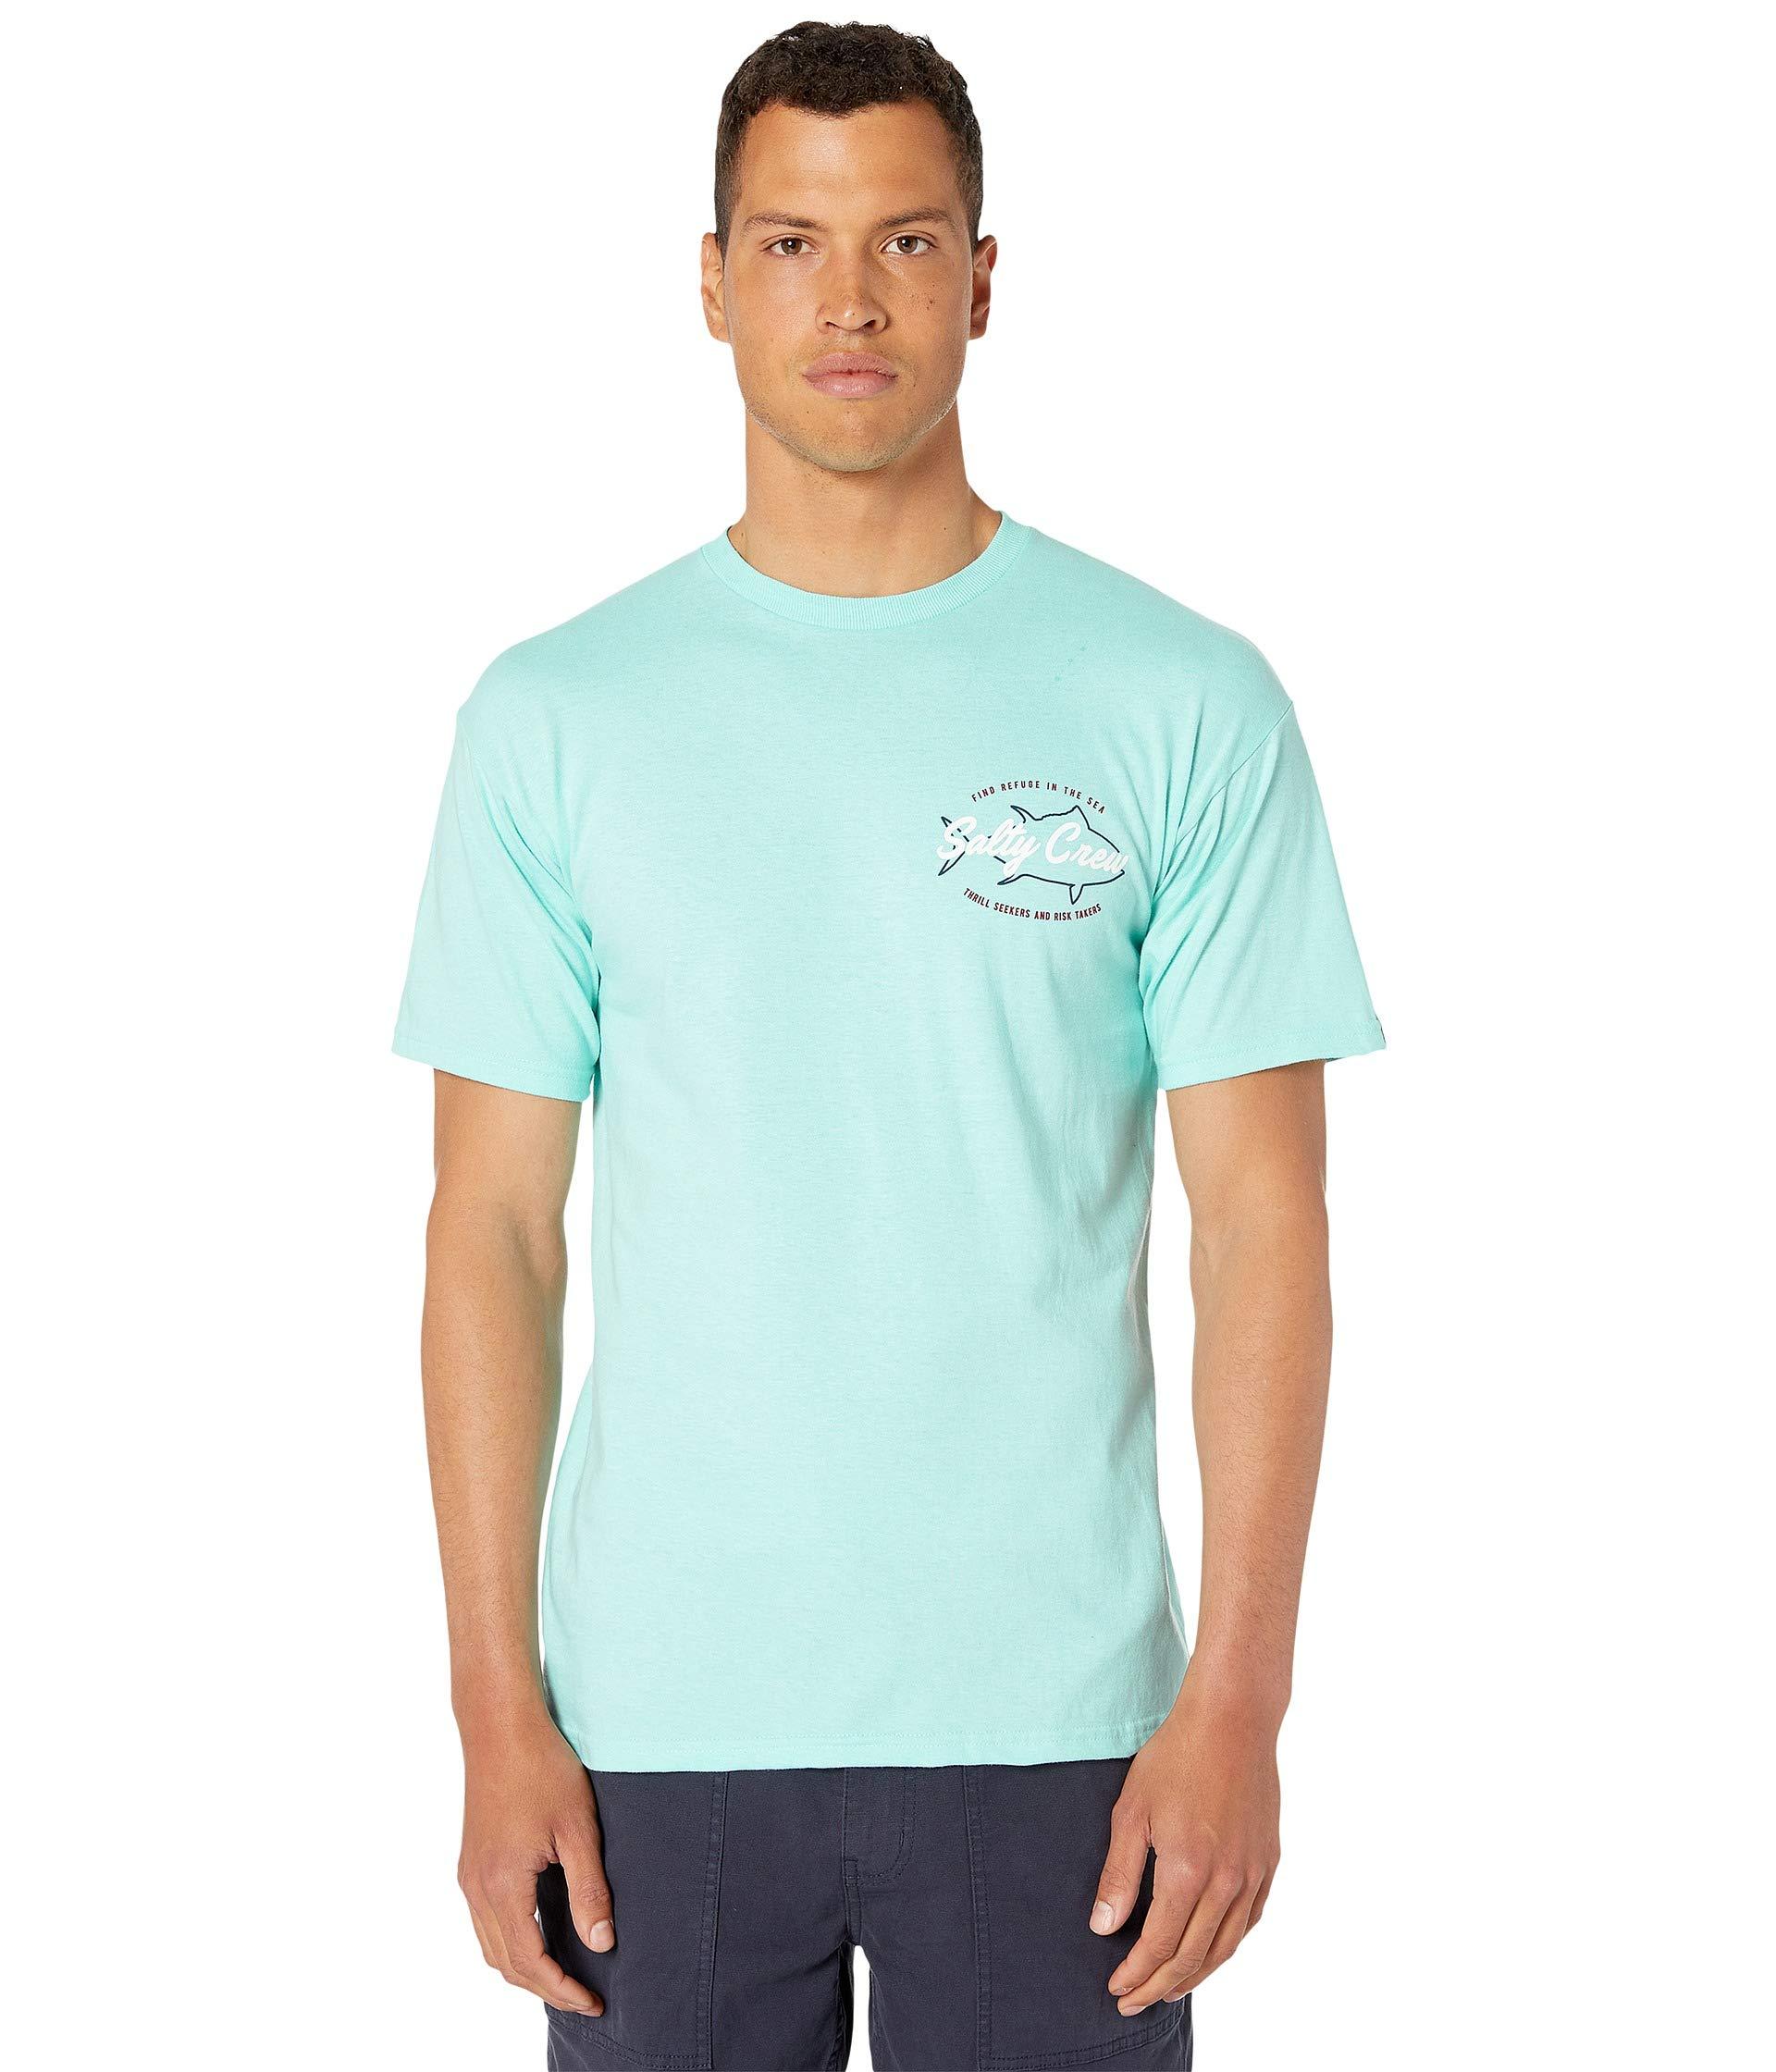 Salty Crew Cotton Blue Water Short Sleeve Tee in Green for Men - Lyst